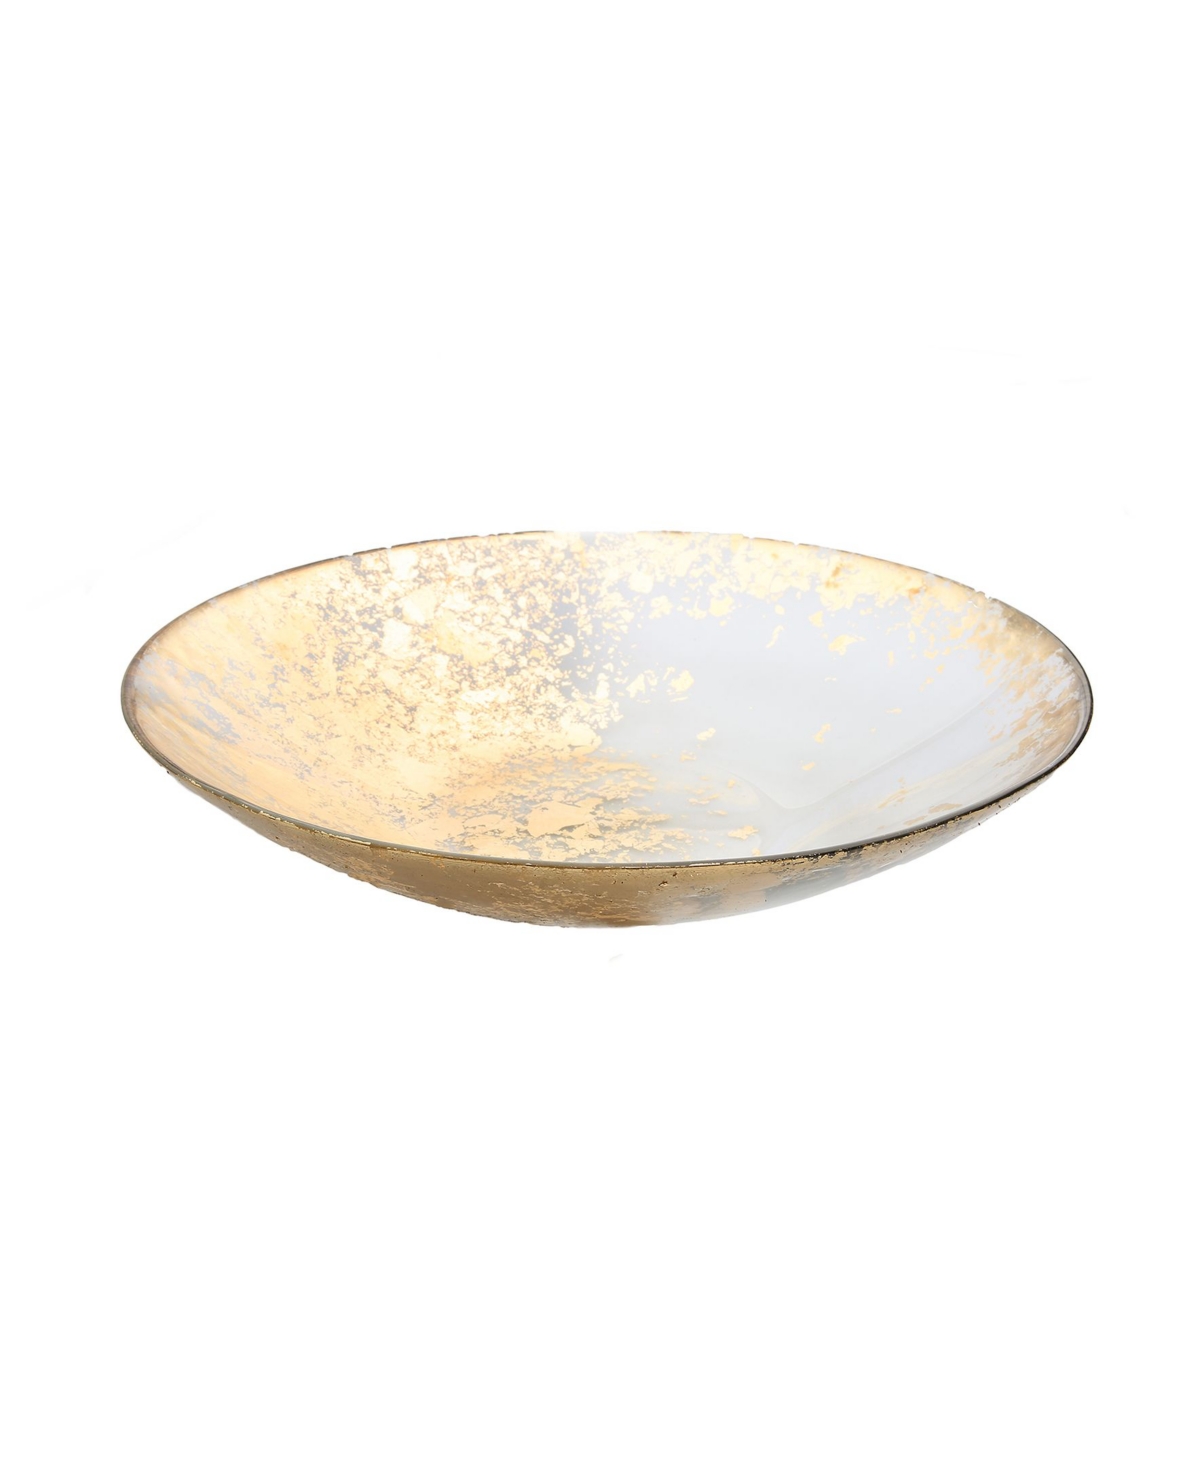 Smoked Glass Bowl with Scattered Gold Tone Design - Gold